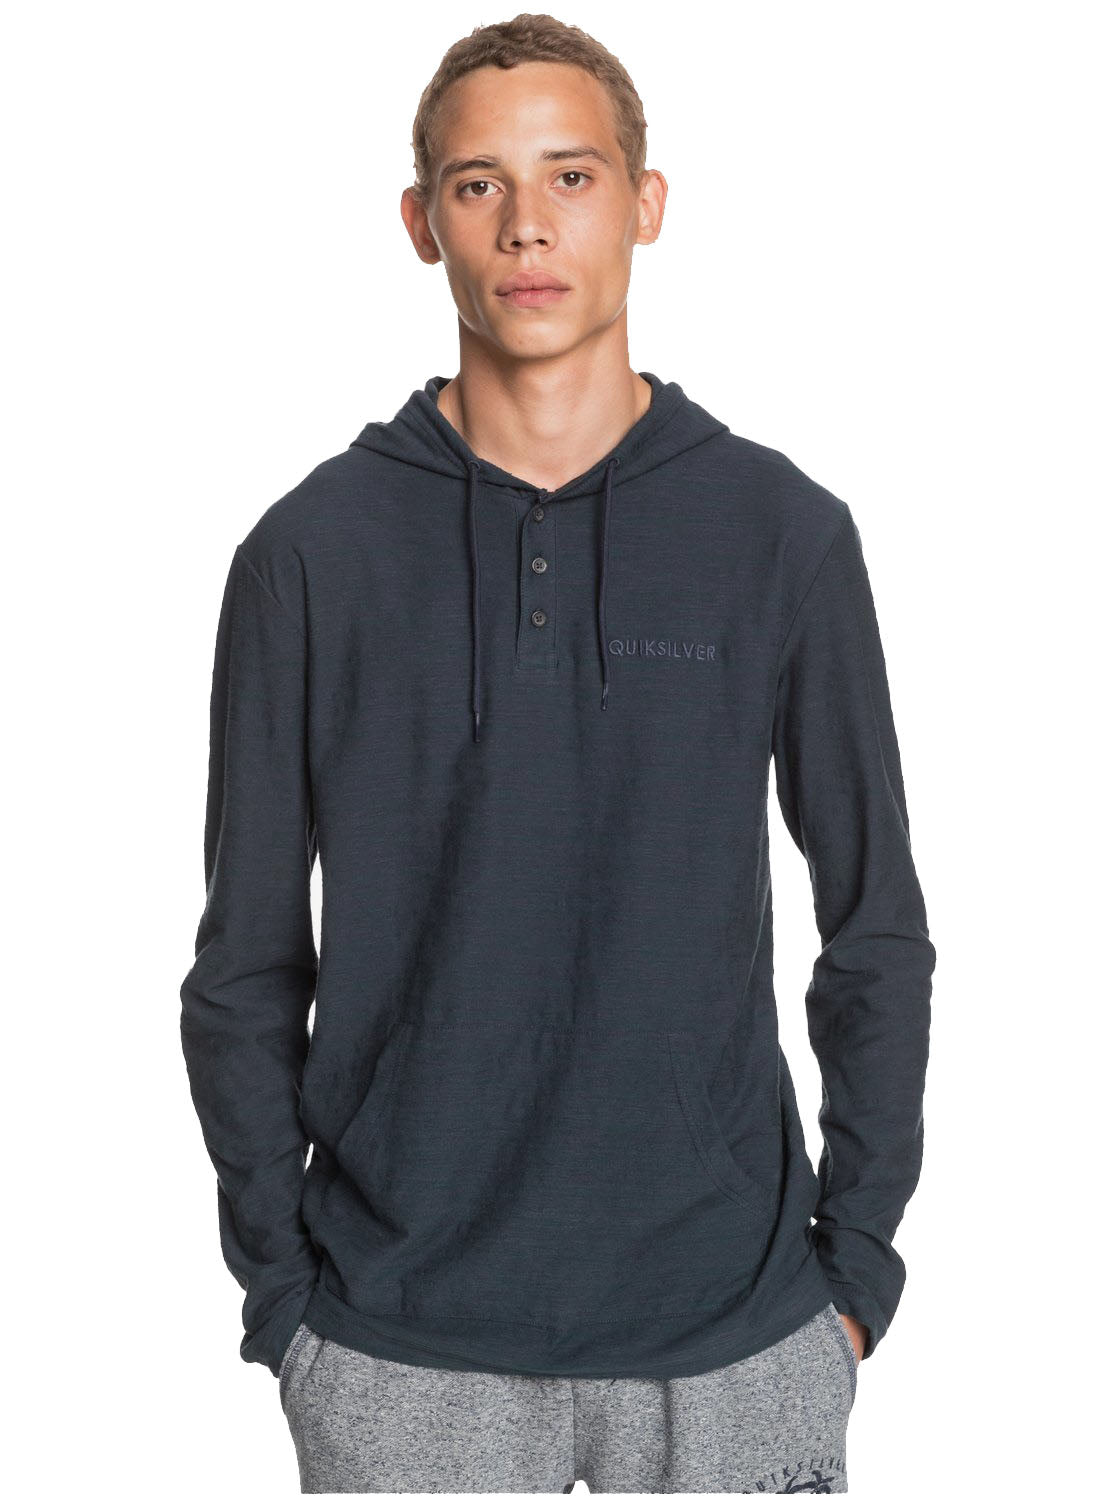 Quiksilver Kentin Long Sleeve Hooded Top BYP3 M